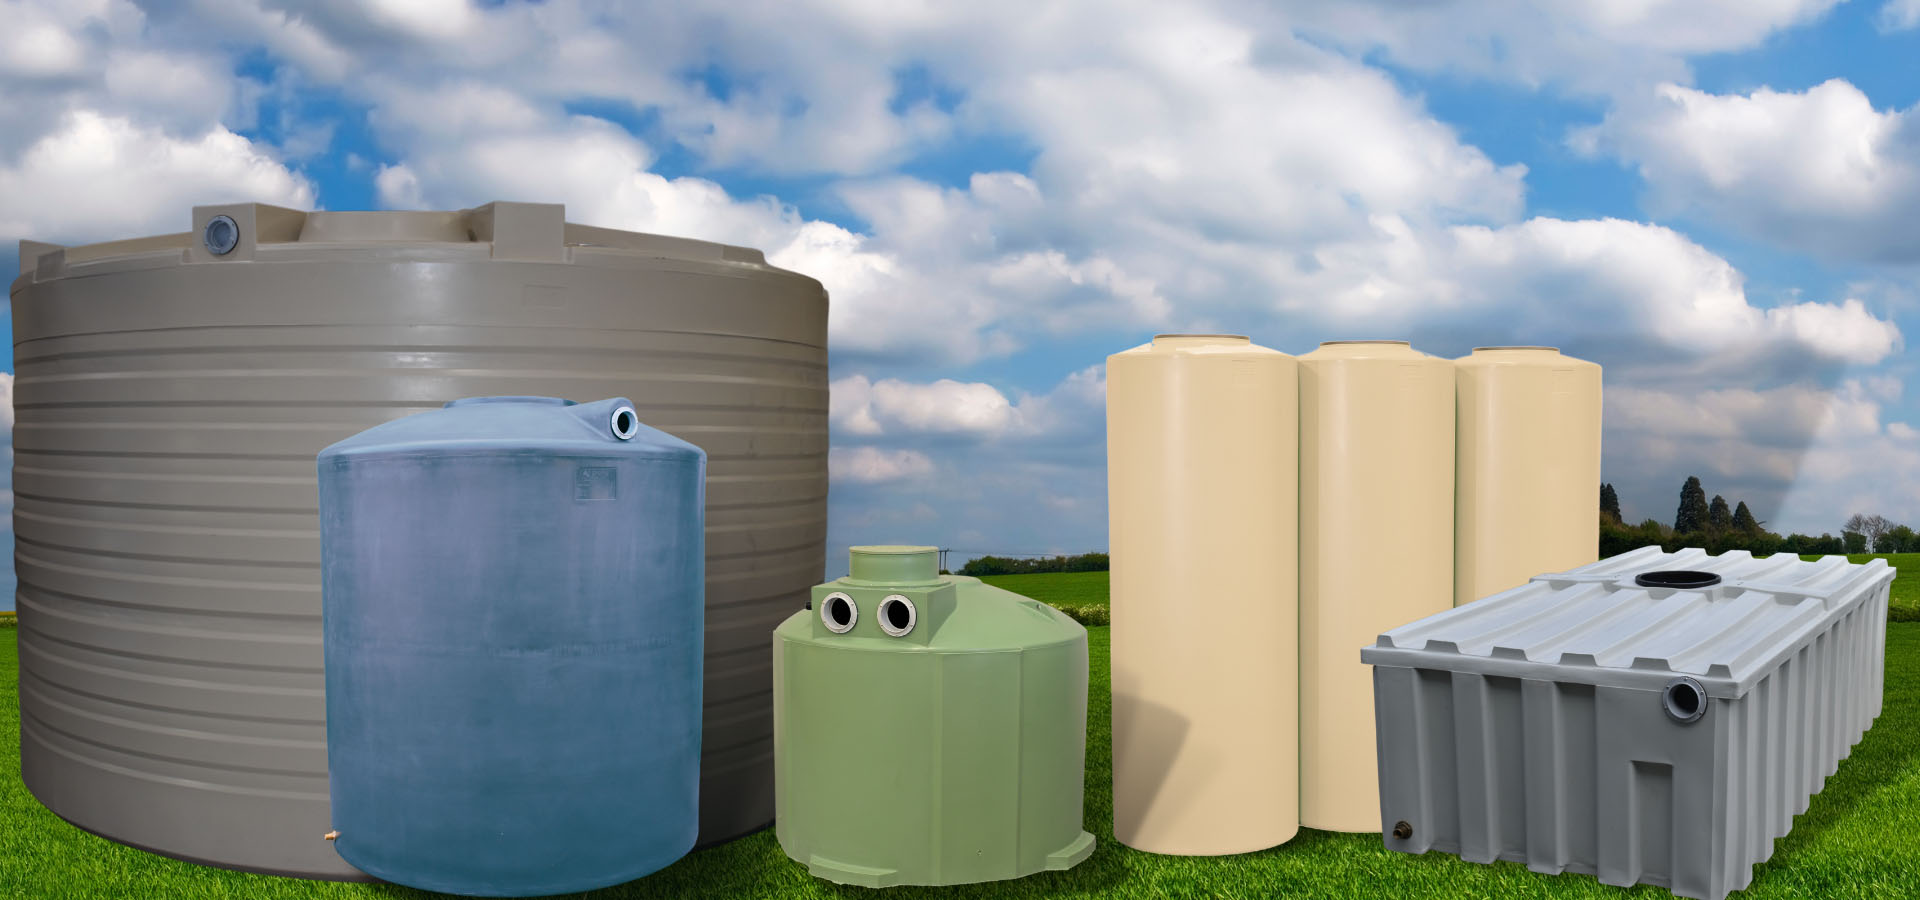 Featured image for “How to Select the Right Water Tank for Your AU Property”